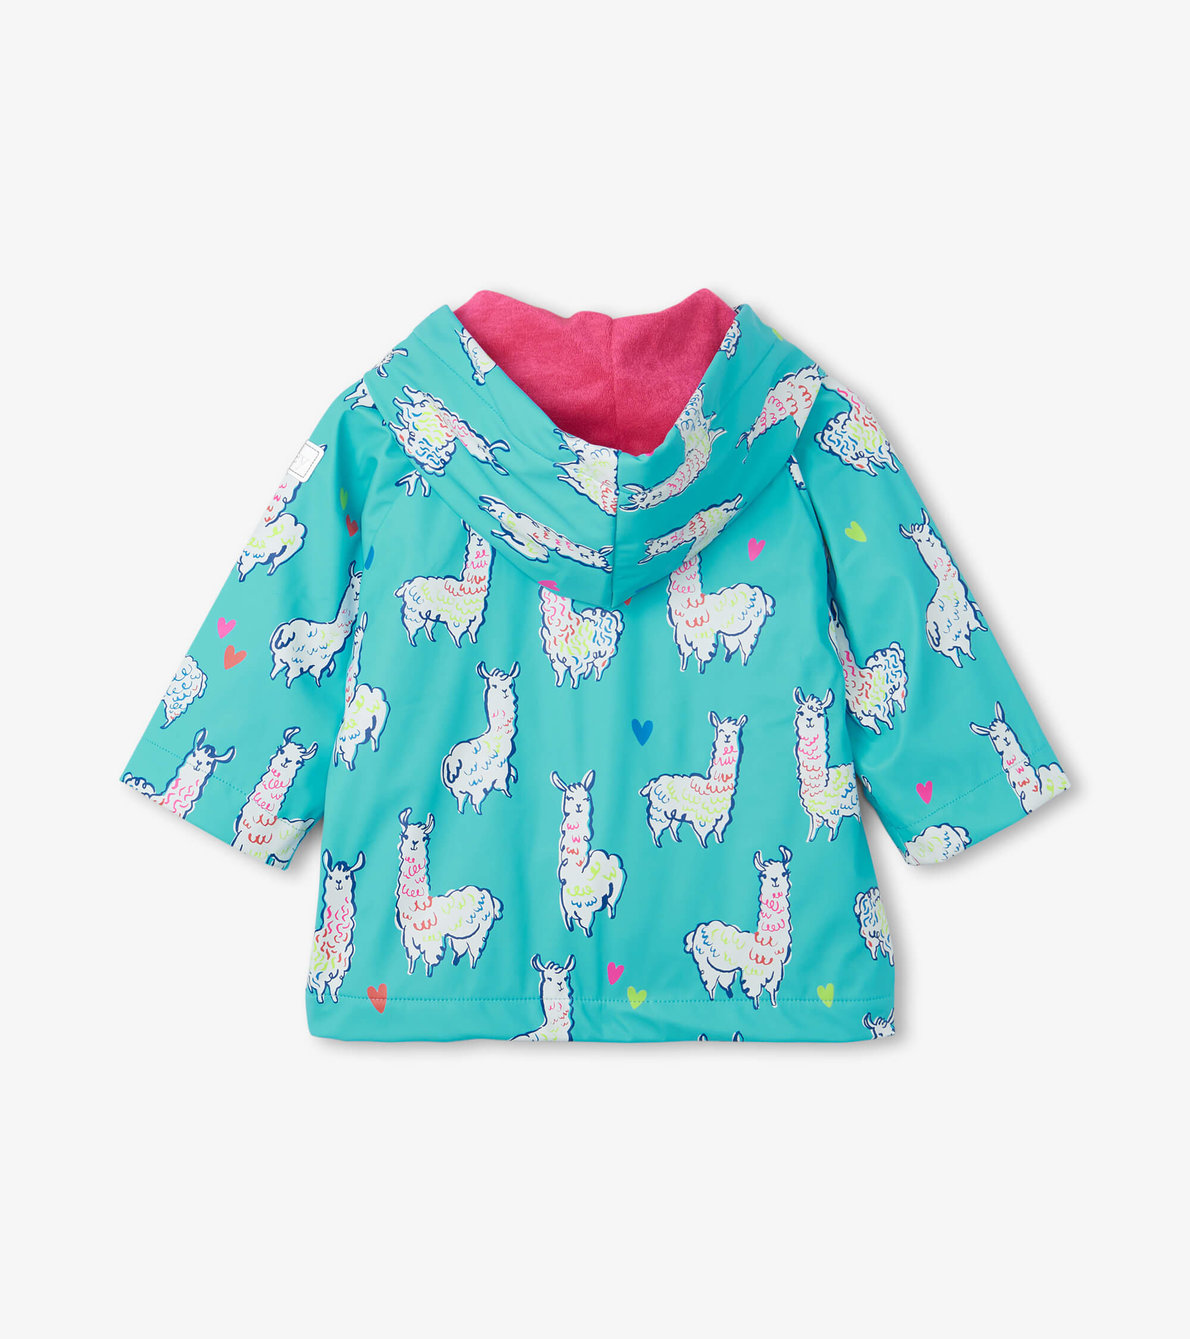 View larger image of Adorable Alpacas Baby Raincoat